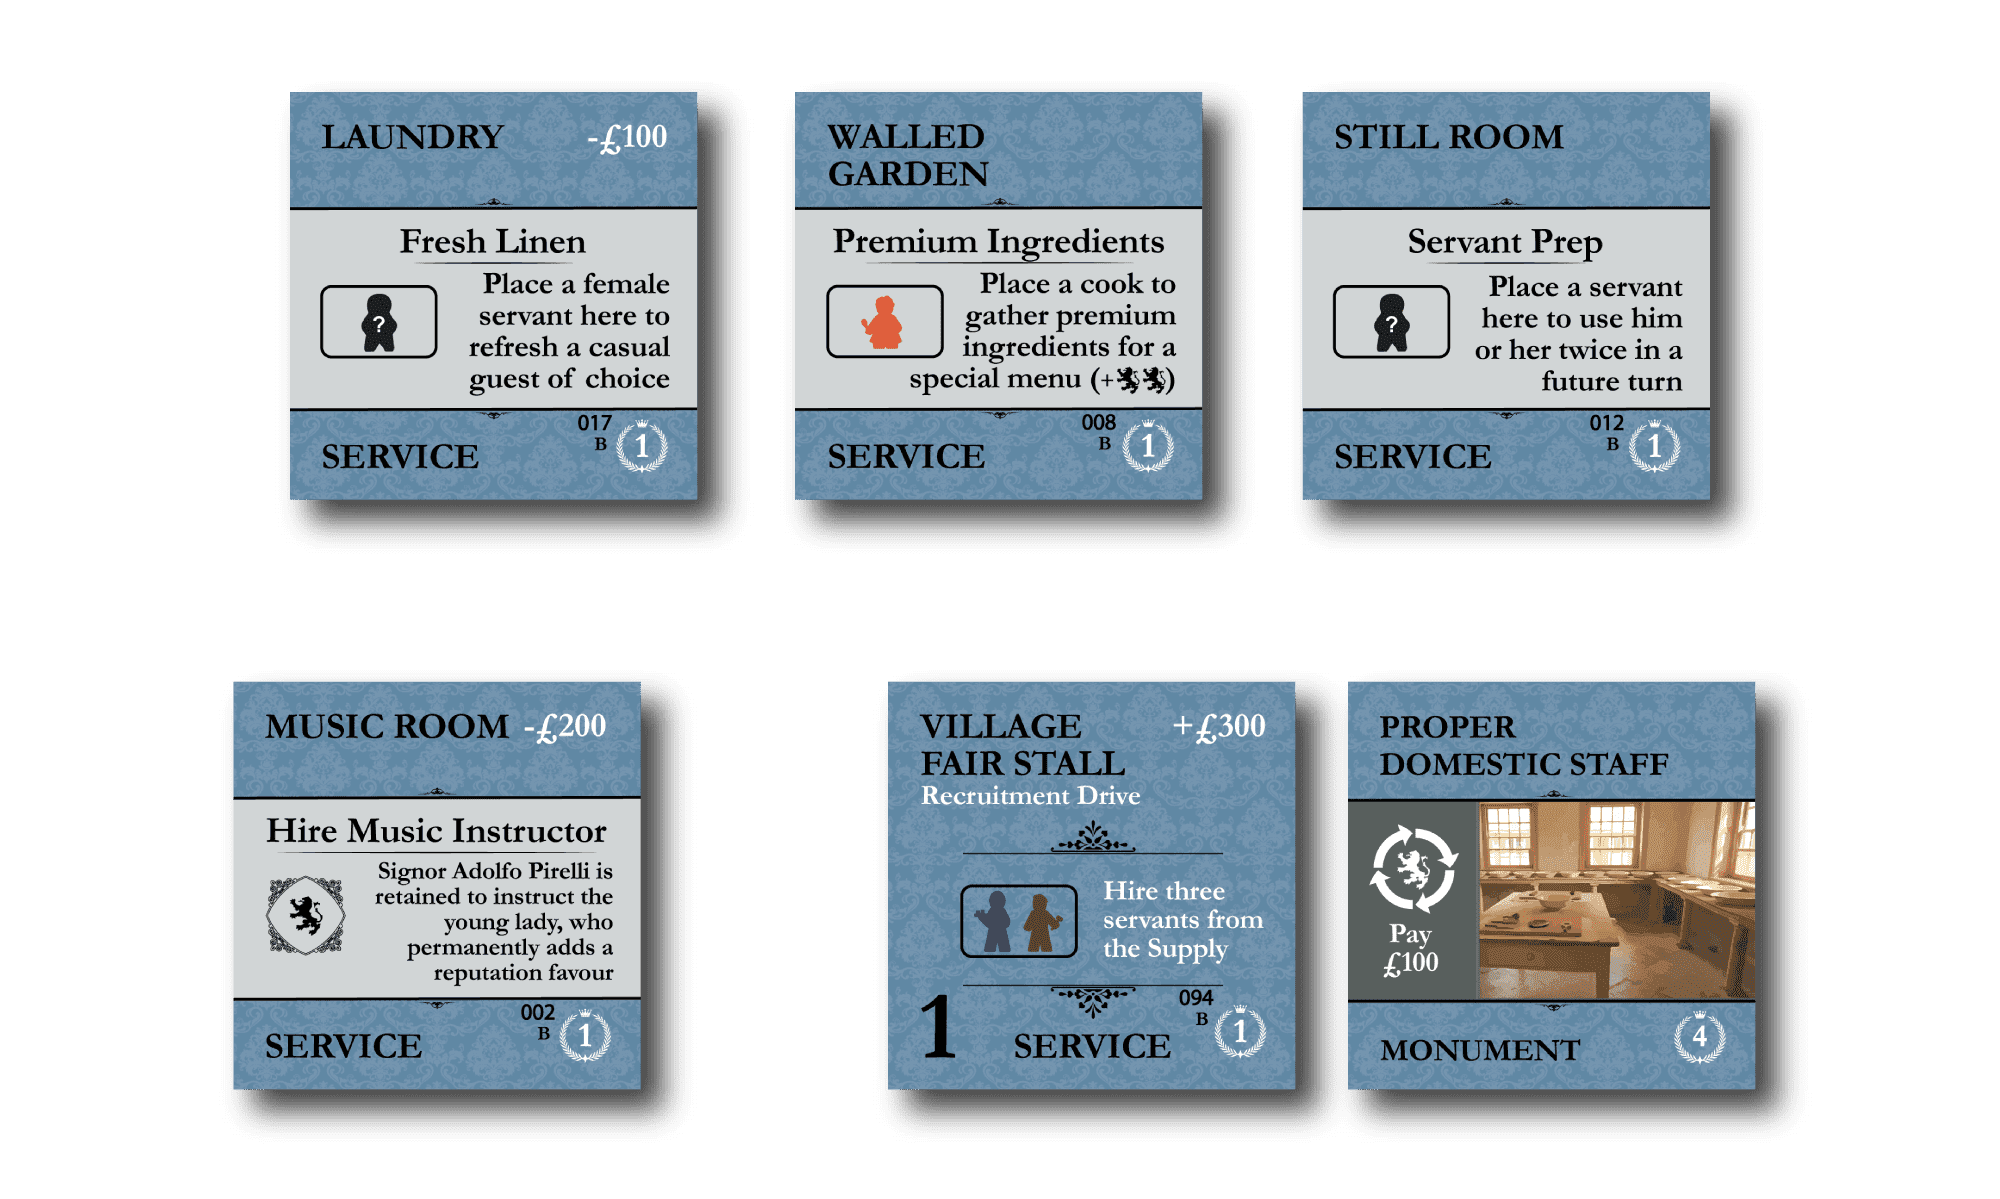 Obsession Promotional Tiles - Gaming Library